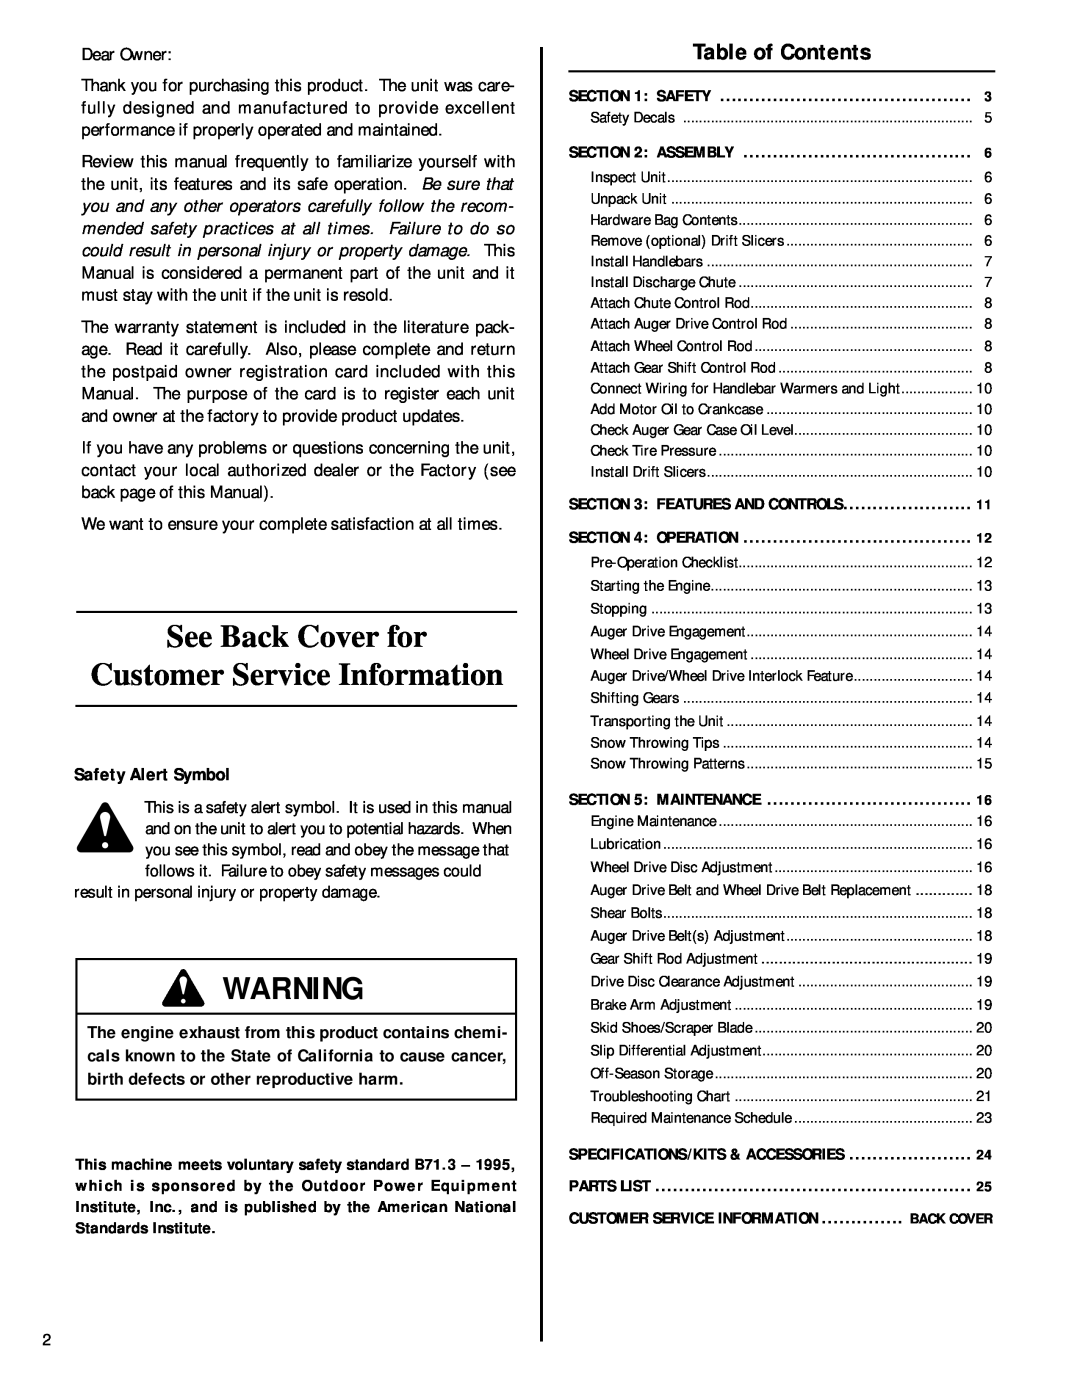 Troy-Bilt 42052, 42051 Safety Alert Symbol, Parts List, See Back Cover for Customer Service Information, Table of Contents 